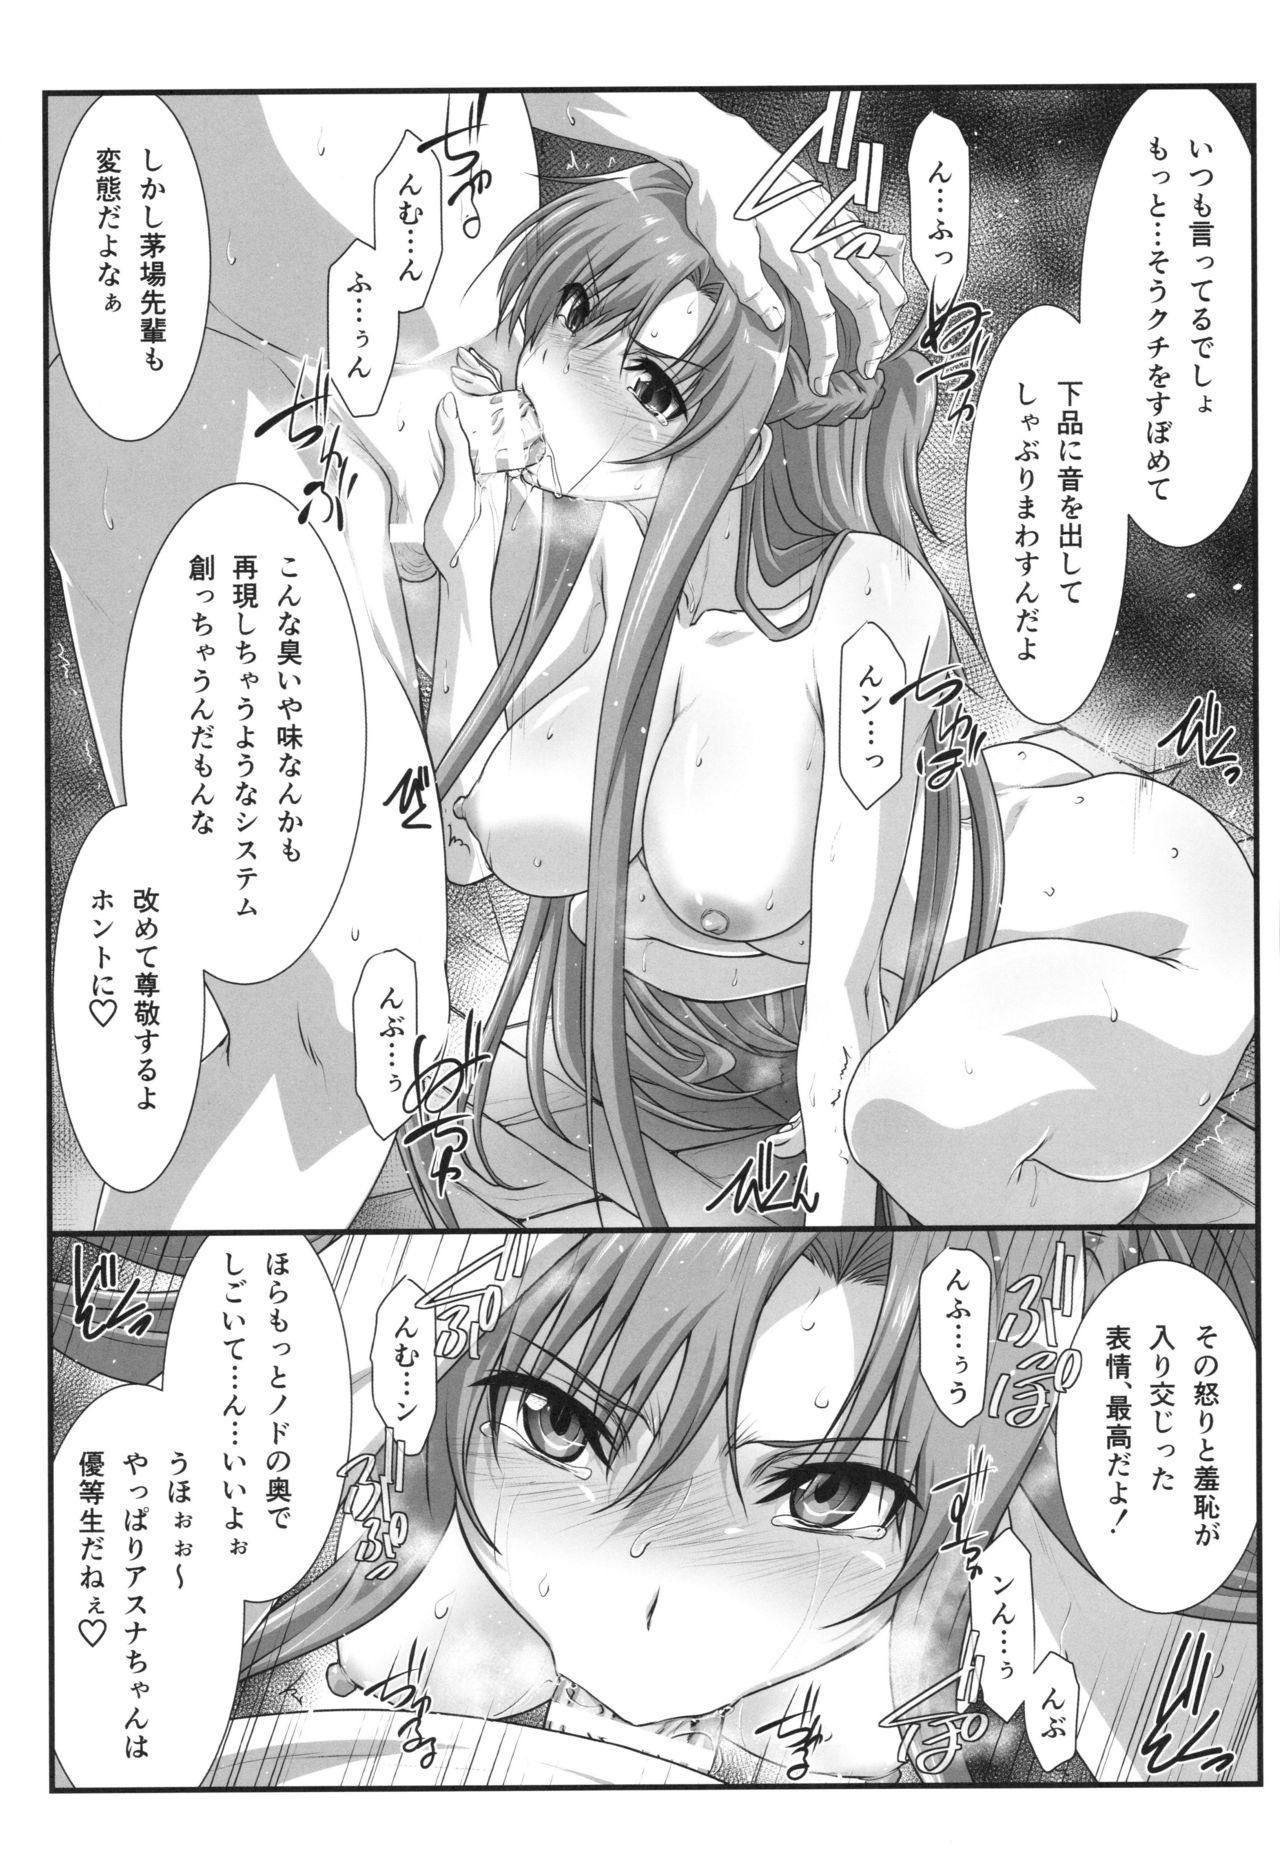 Home Astral Bout Ver. 41 - Sword art online Mmf - Page 6